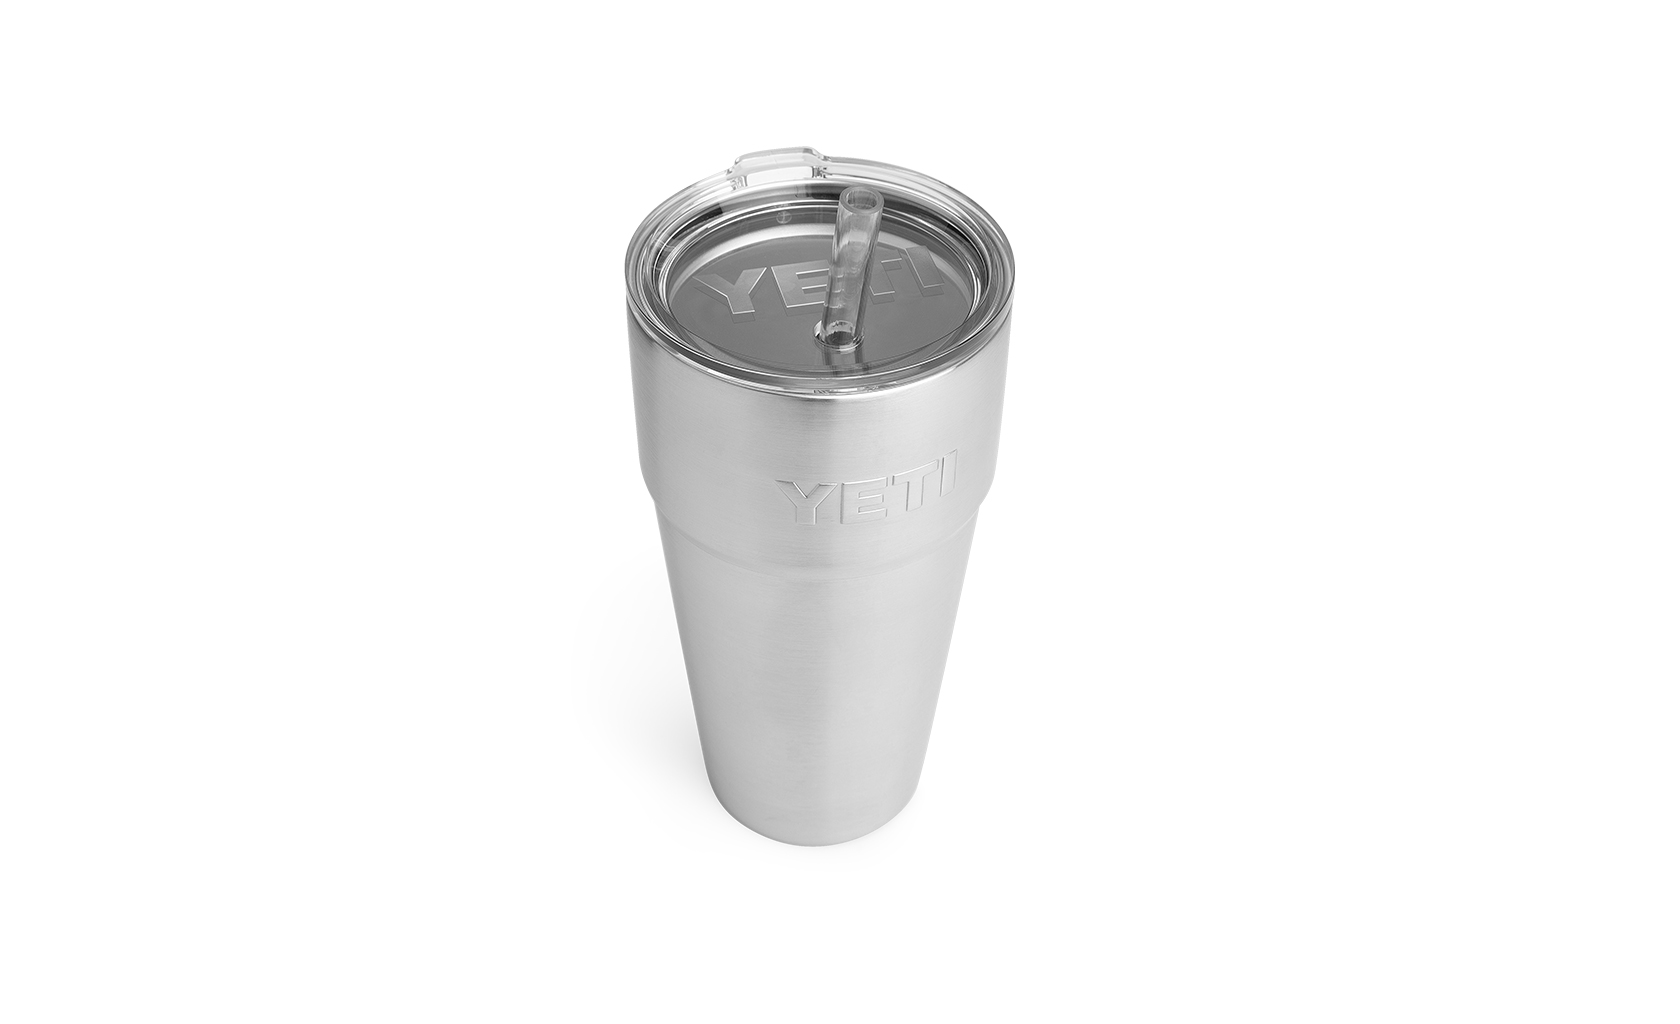 https://www.yeti.com/on/demandware.static/-/Sites-masterCatalog_Yeti/default/dw733d3c18/images/pdp-Rambler/Rambler-26oz-Cup-with-Straw-Lid/Stainless-Steel/200626-Rambler-26oz_Stackable_Stainless_with-Straw-Lid_Quarter-Overhead-1680x1024.jpg